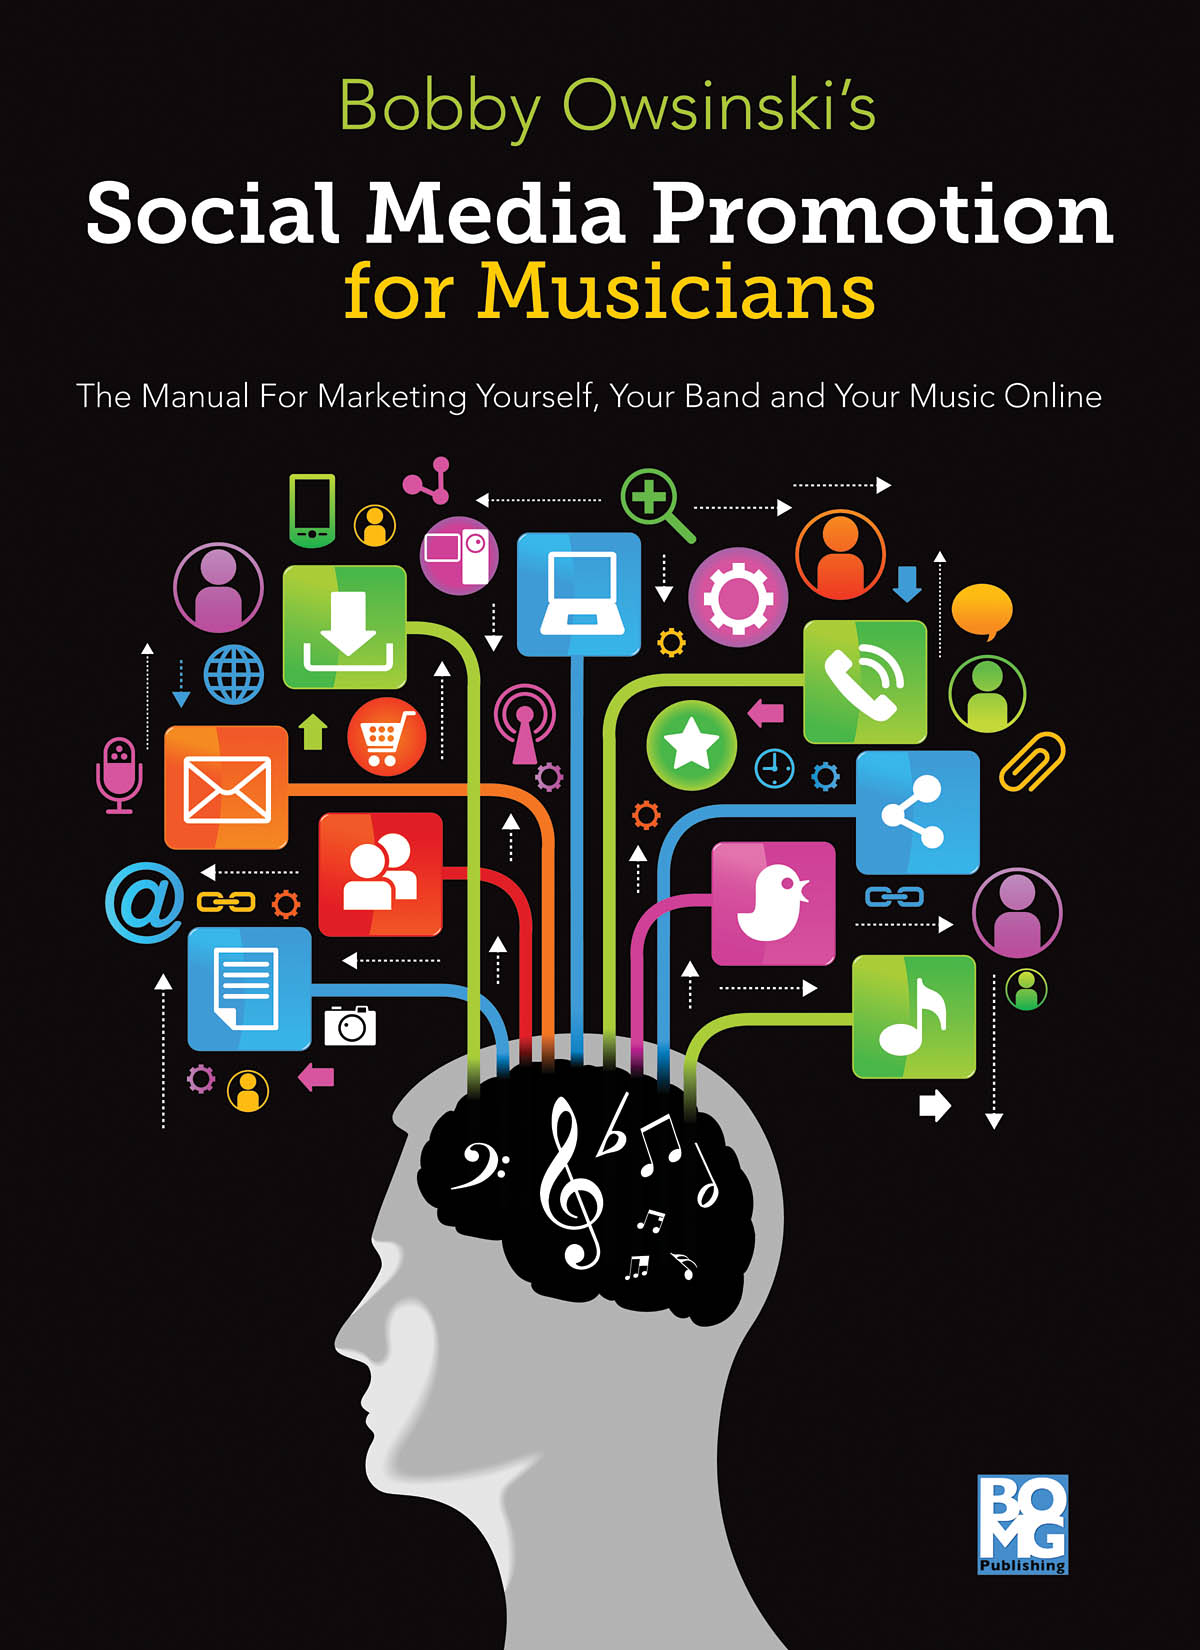 Social Media Promotions for Musicians: Reference Books